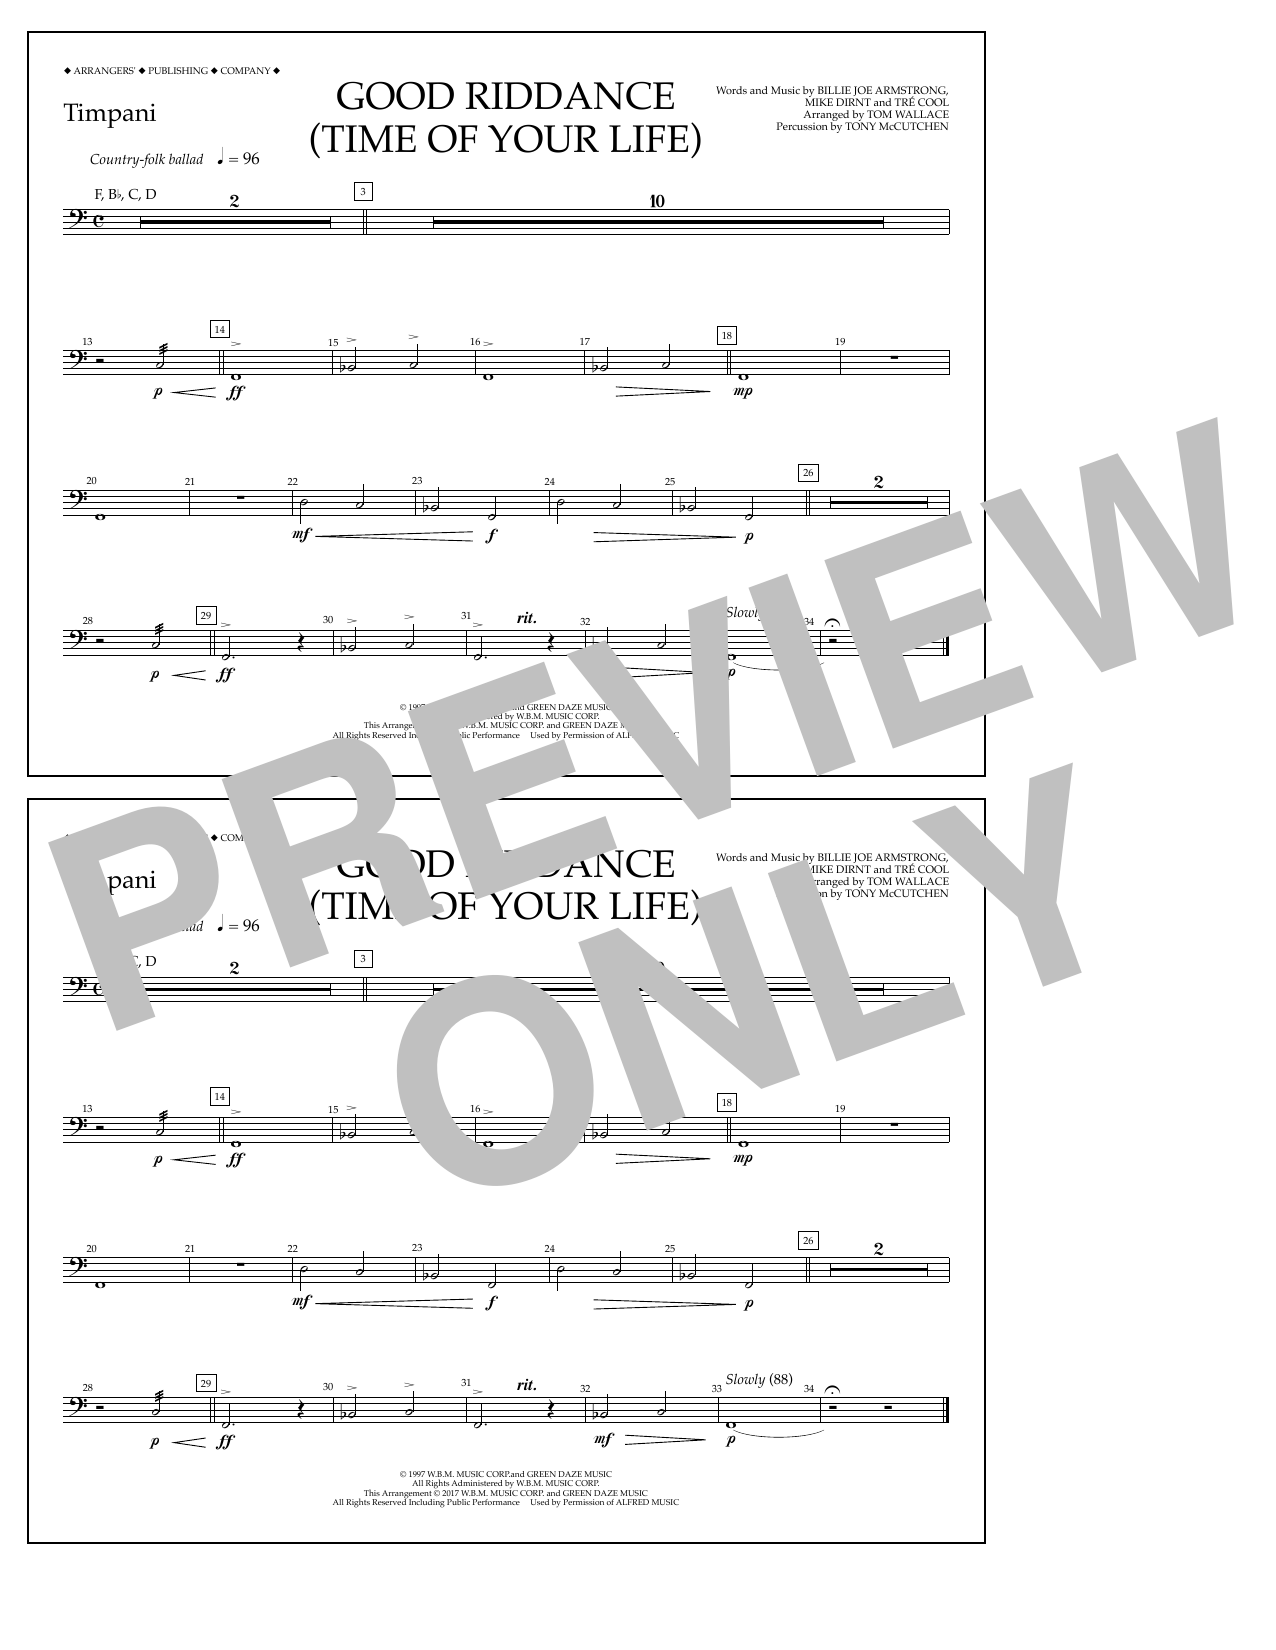 Download Tom Wallace Good Riddance (Time of Your Life) - Tim Sheet Music